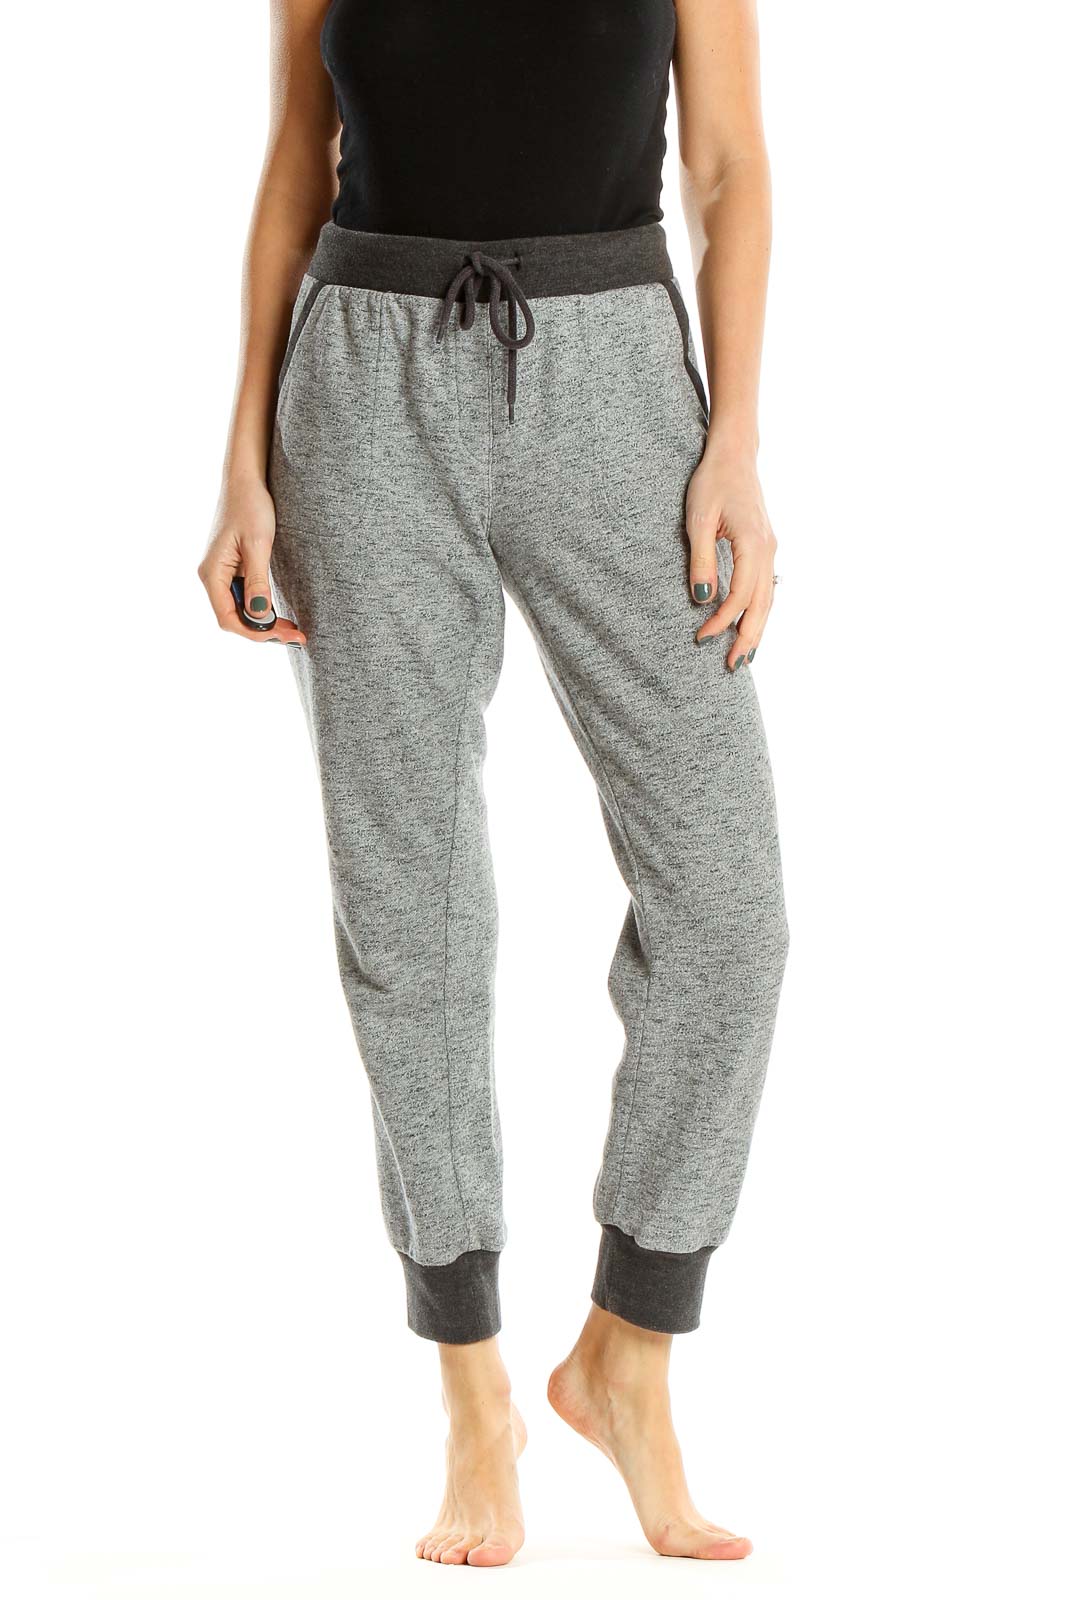 Gray Heather Casual Sweatpants Front